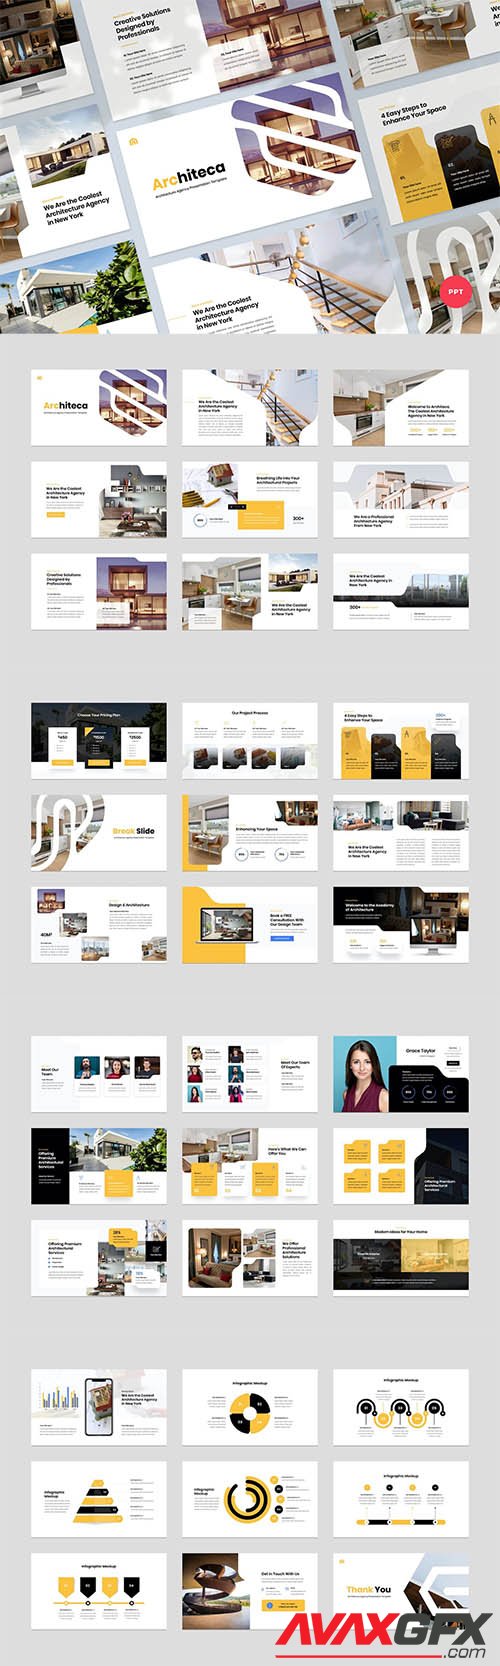 Architecture Agency & Design PowerPoint Template